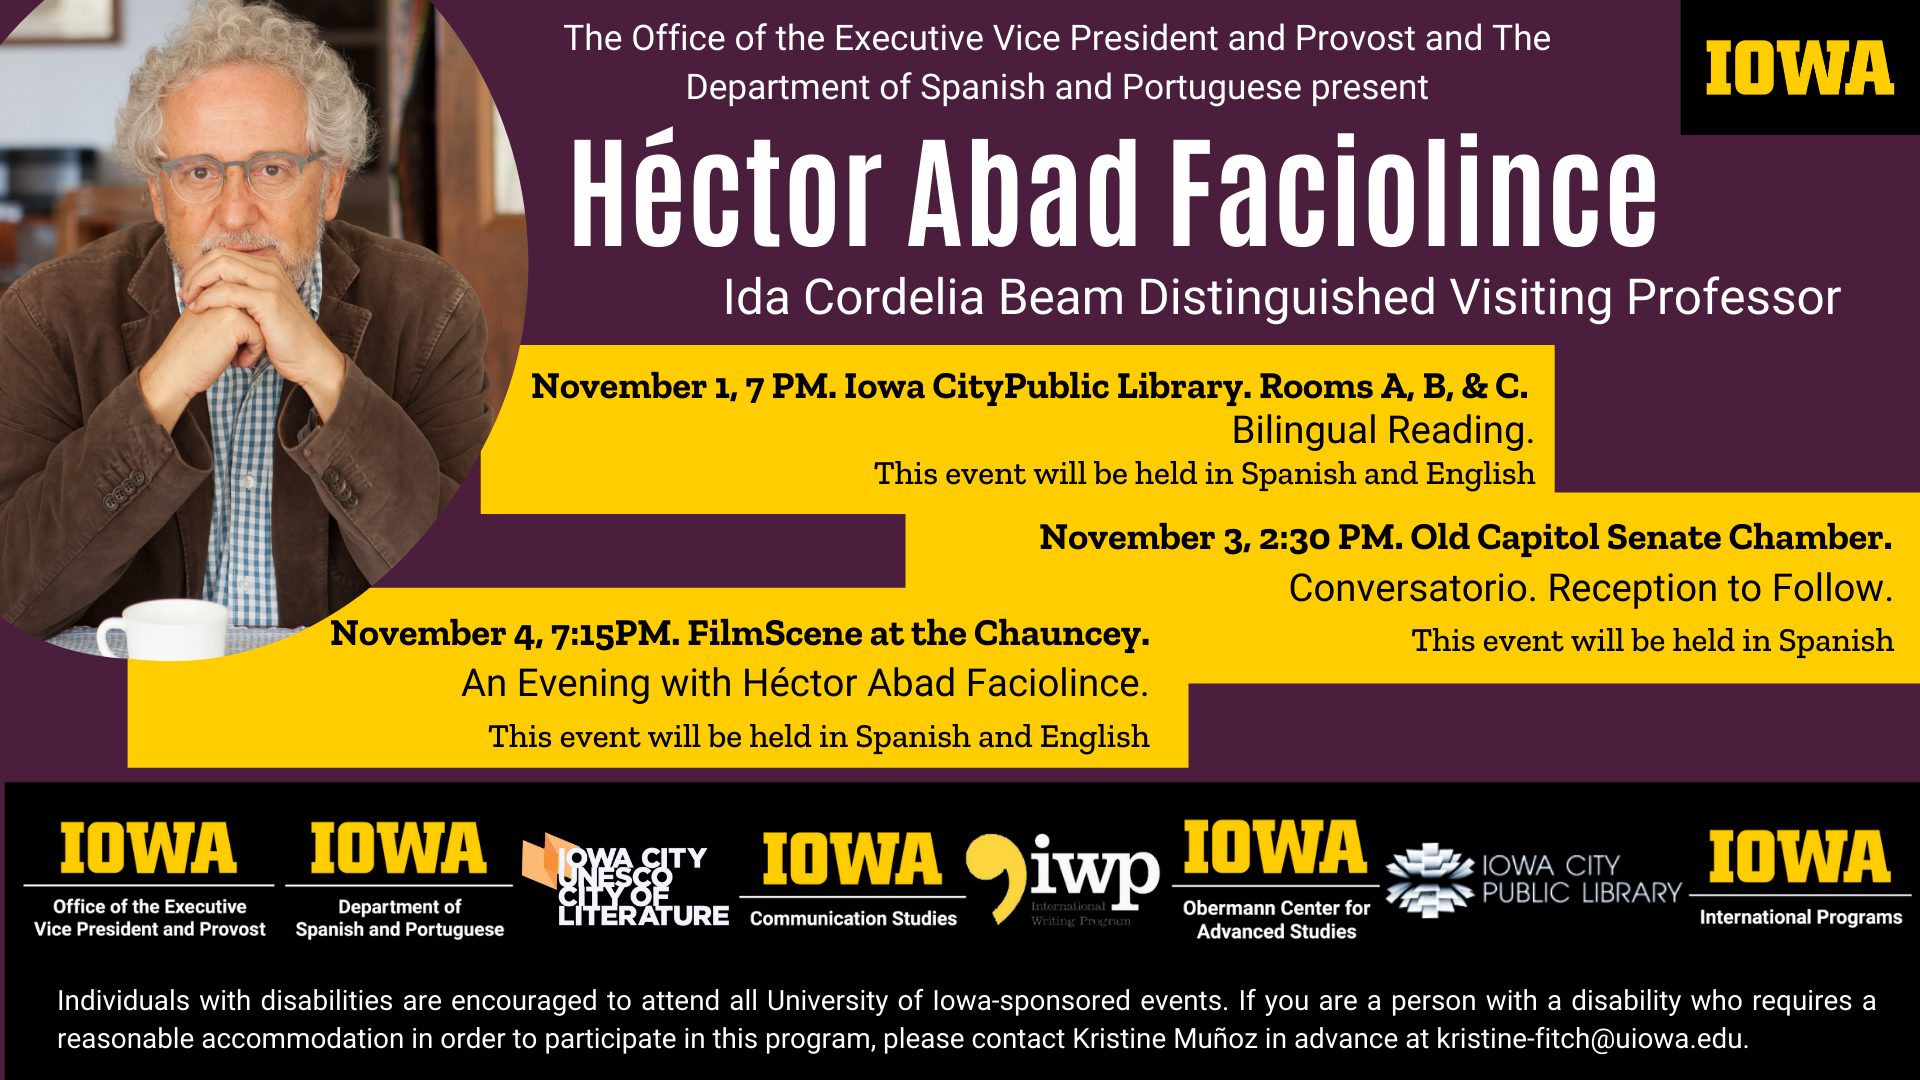 The Office of the Executive Vice President and Provost and The Department of Spanish and Portuguese present Héctor Abad Faciolince an Ida Cordelia Beam Distinguished Visiting Professor. He will be presenting at 3 different events. The first event is November 1, 7 PM. Iowa CityPublic Library. Rooms A, B, & C. It is a Bilingual Reading. The event will be held in both Spanish and English. The second event is November 3, 2:30 PM. Old Capitol Senate Chamber. Conversatorio. Reception to Follow. This event will be held in Spanish. The last event will be November 4, 7:15PM. FilmScene at the Chauncey. An Evening with Héctor Abad Faciolince. This event will be help in both Spanish and English. These events are sponsored by the Iowa Office of the executive president and provost, the Iowa department of Spanish and Portuguese, The Iowa City UNESCO City of Literature, the Iowa Communication Studies Program, the International writers program, The Obermann center for Advanced Studies,  the Iowa City Public Library, and the Iowa International Programs.  Individuals with disabilities are encouraged to attend all University of Iowa-sponsored events. If you are a person with a disability who requires a reasonable accommodation in order to participate in this program, please contact Kristine Muñoz in advance at kristine-fitch@uiowa.edu.